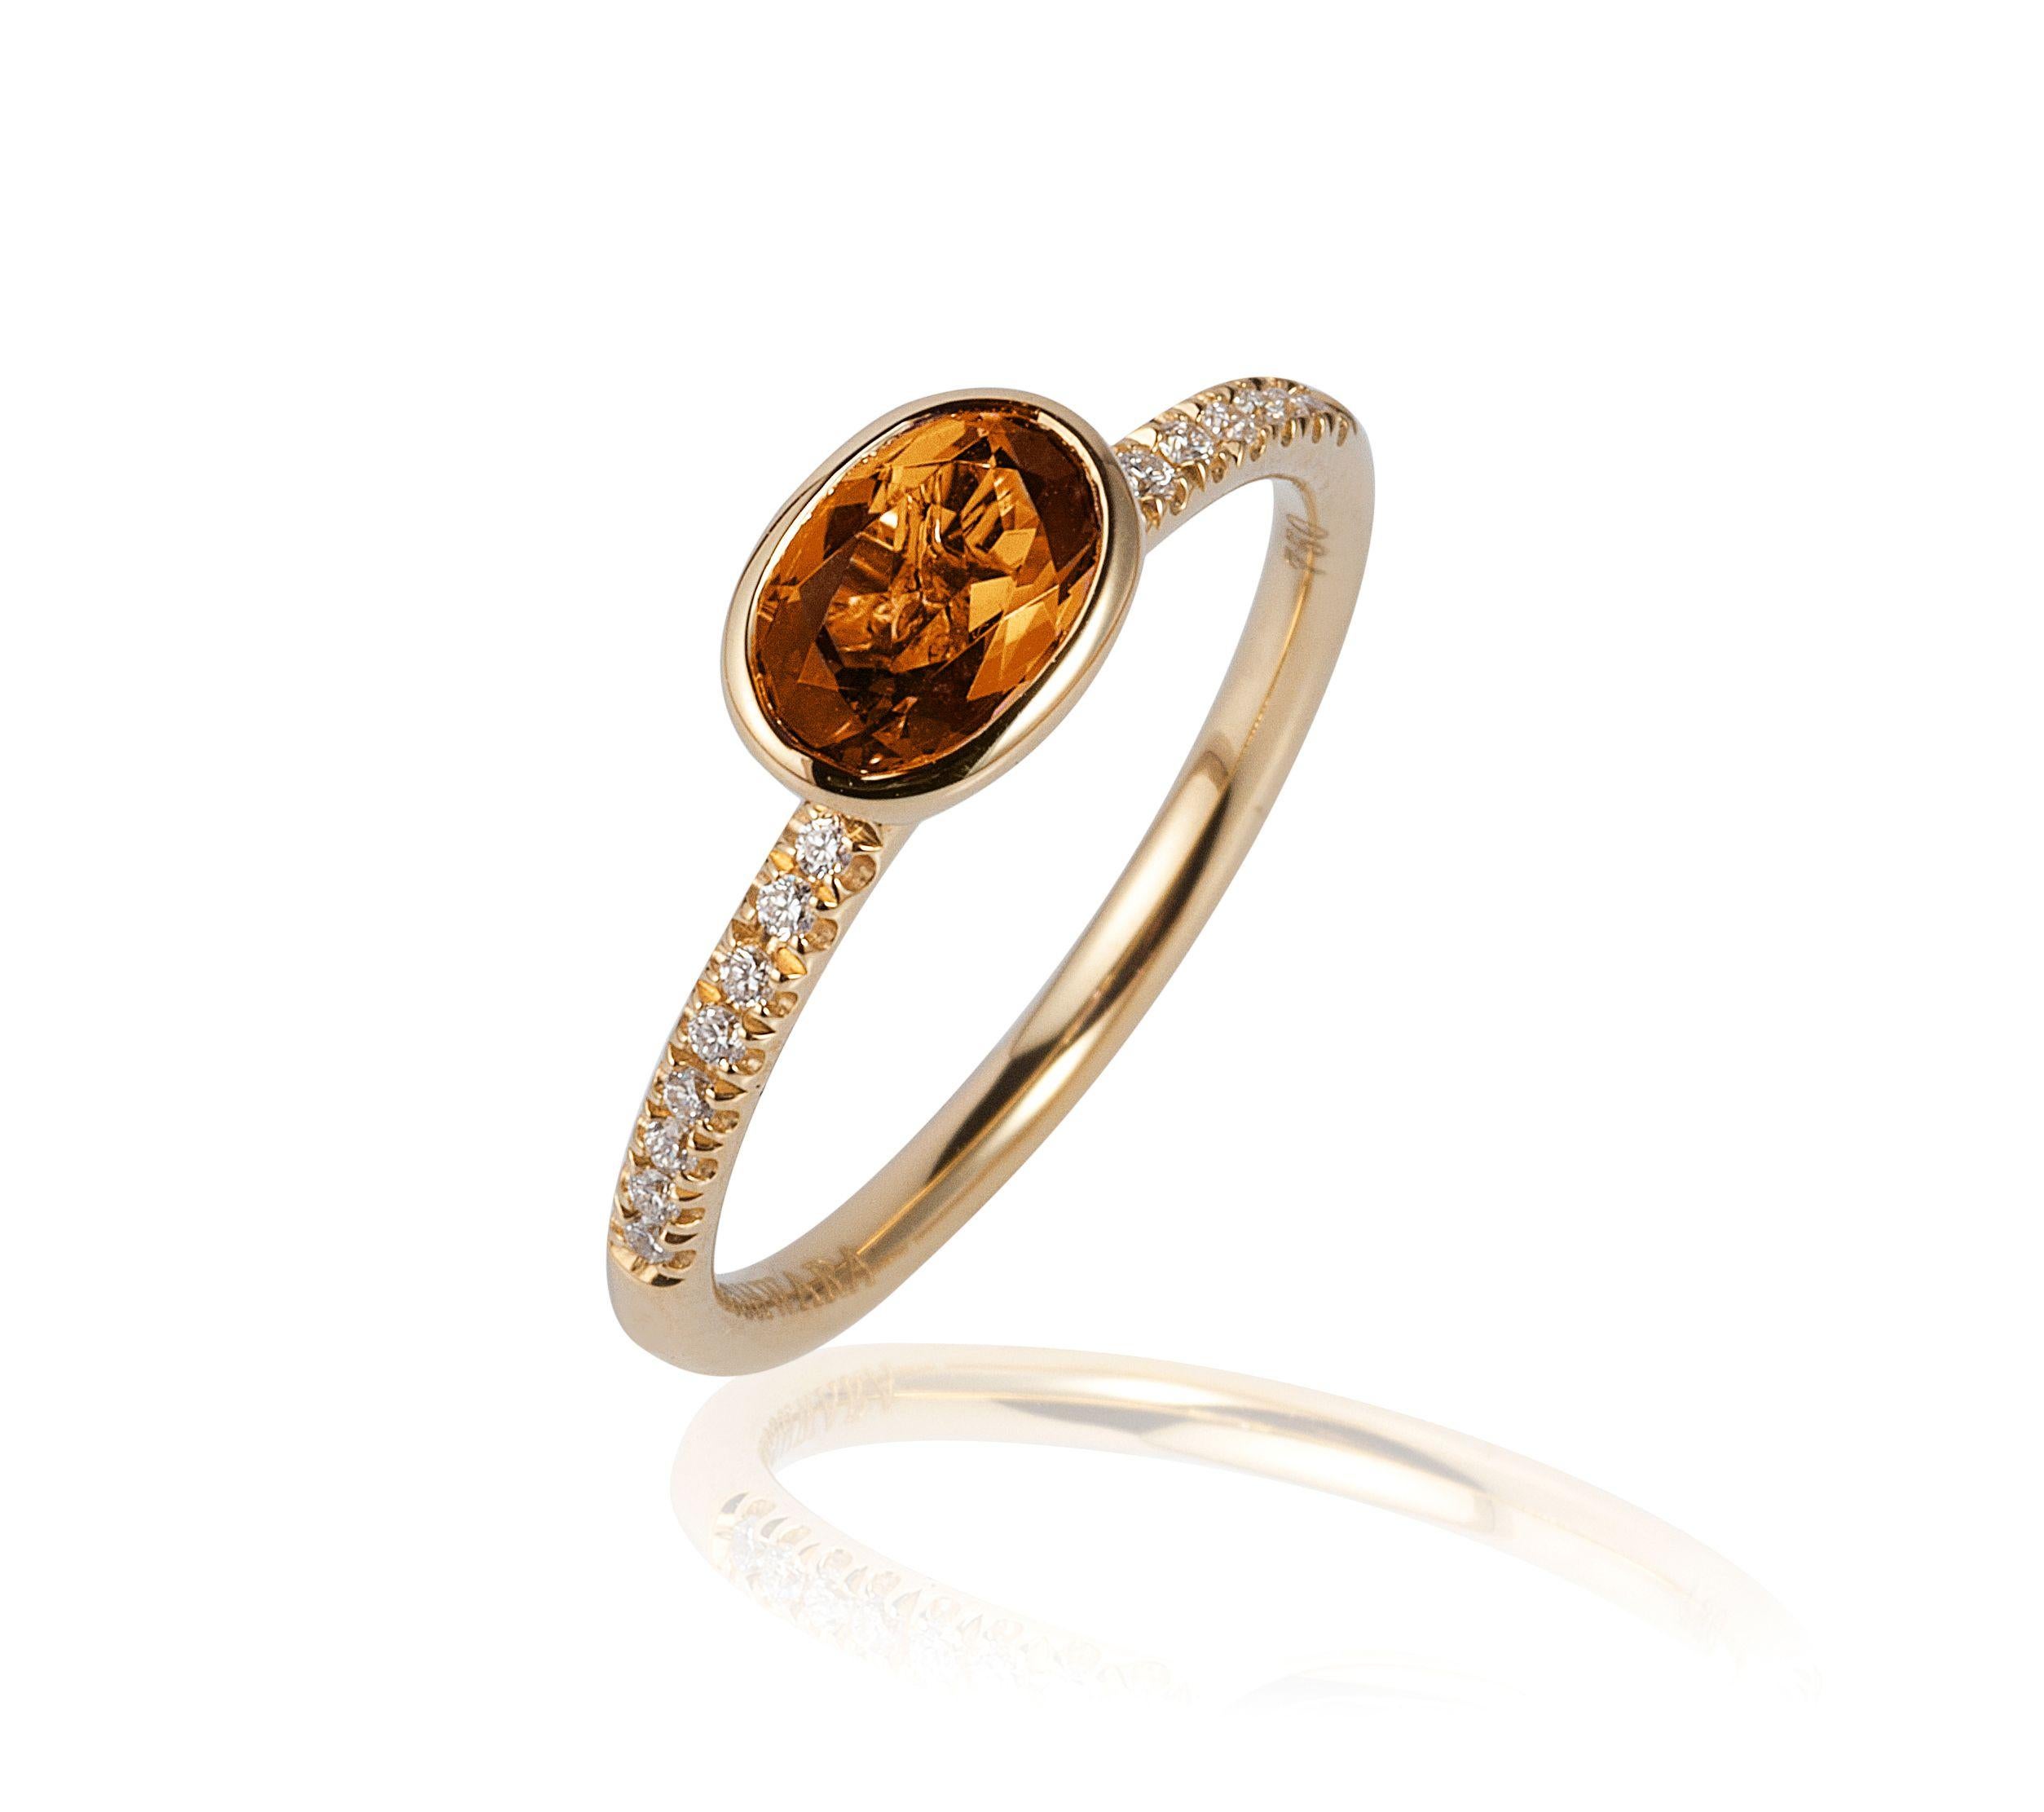 Citrine Faceted Oval Ring with Diamond in 18K Yellow Gold, from 'Gossip' Collection
 
 Stone Size: 7 x 5 mm
 
 Gemstone Approx. Wt: 0.78 Carats
 
 Diamonds: G-H / VS, Approx. Wt: 0.08 Carats